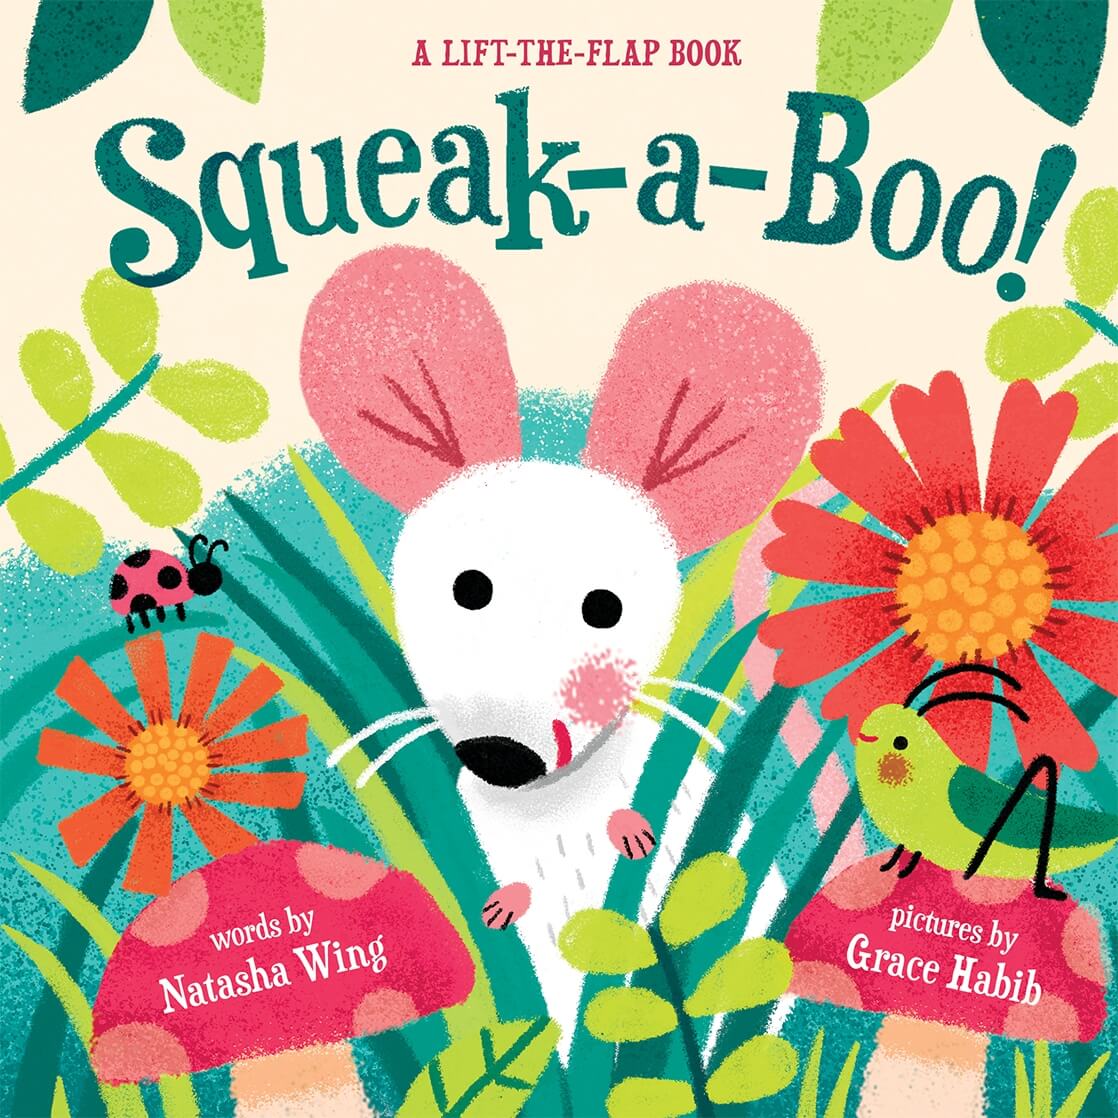 very colourful, juvenile cover image of illustrated plants and animals, a mouse face appearing in the middle. Title of the book 'Squeek-a-boo' placed top, center, written in bold, green, fun text